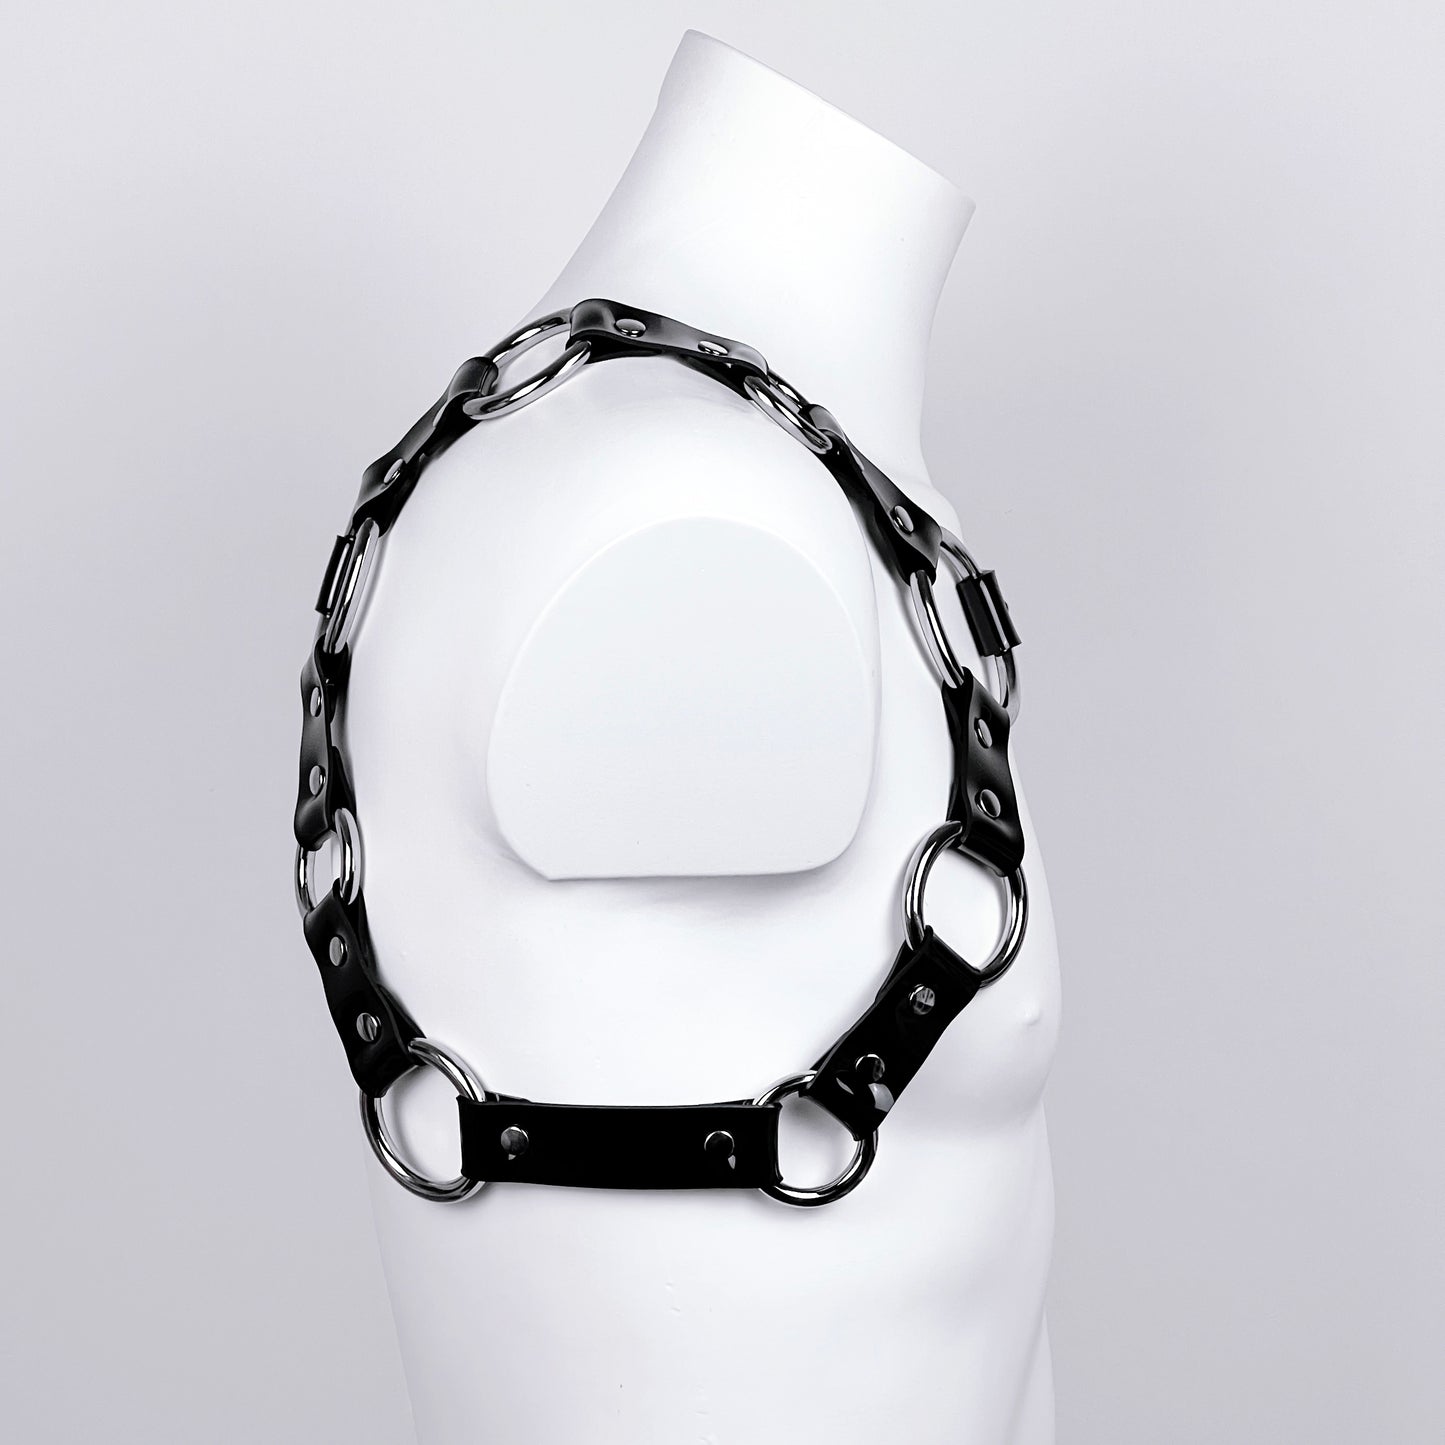 Armor Chest harness